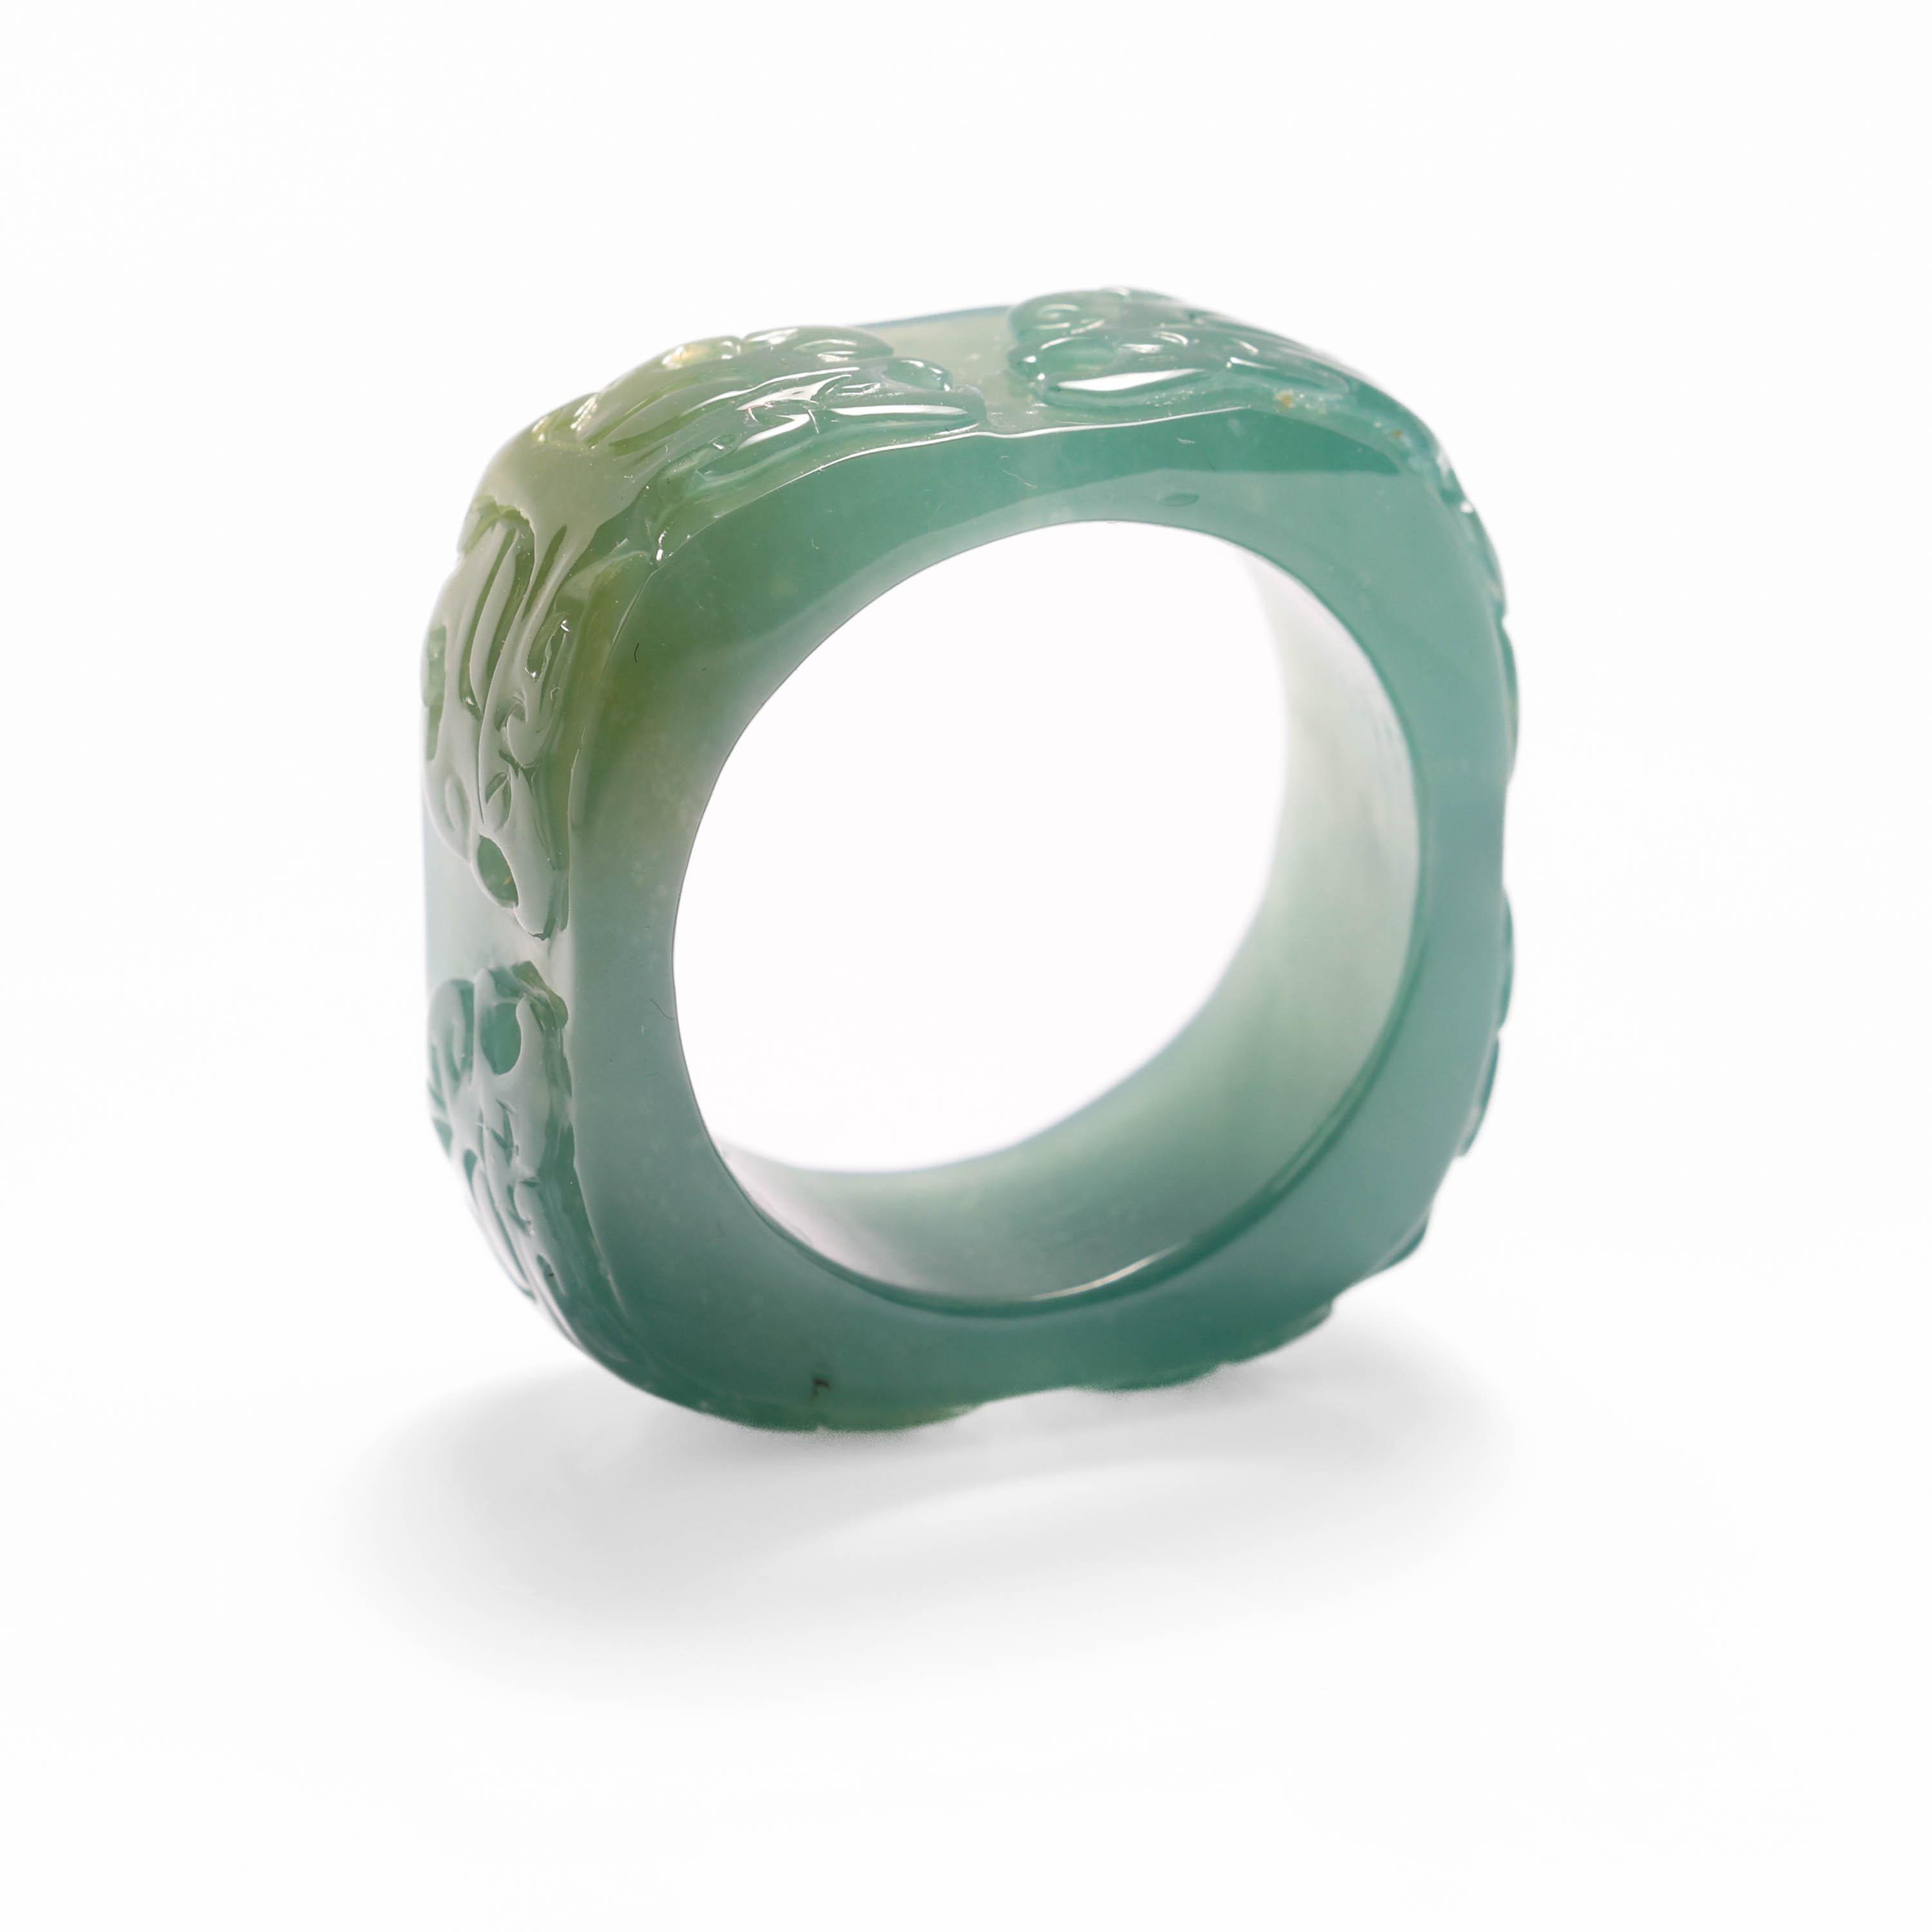 This large, unique ring was carved by hand from one piece of bluish-green natural and untreated jadeite jade. The ring has been carved in a square form with rounded corners and is surprisingly comfortable to wear. Intricate design elements have been